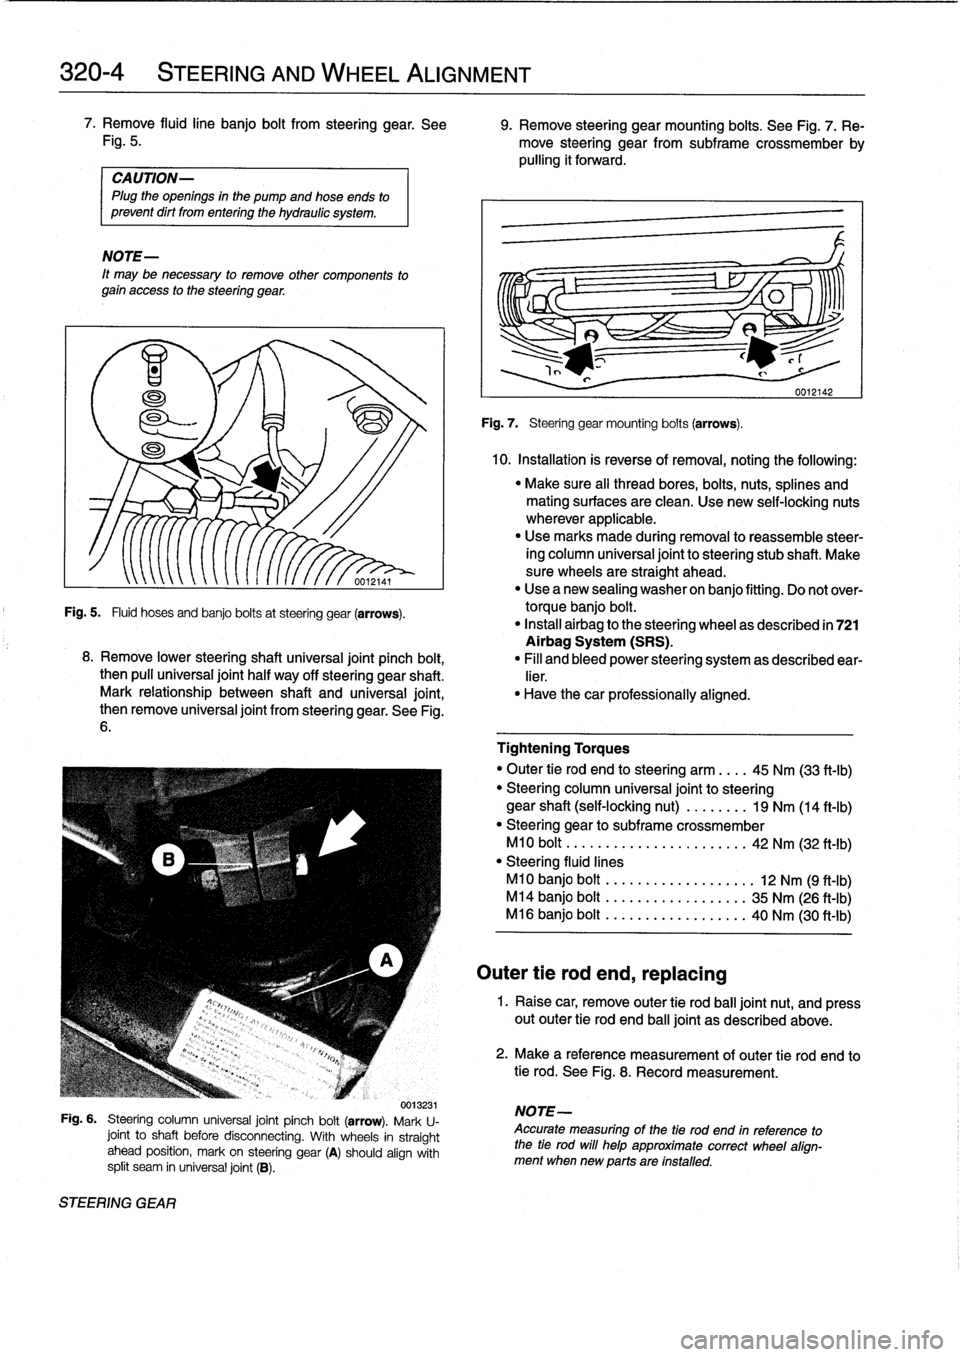 BMW 318i 1997 E36 Workshop Manual 
320-
4

	

STEERING
AND
WHEEL
ALIGNMENT

7
.
Remove
fluidline
banjo
bolt
from
steering
gear
.
See

	

9
.
Remove
steering
gearmounting
bolts
.
See
Fig
.
7
.
Re
Fig
.
5
.

	

move
steering
gear
from
s